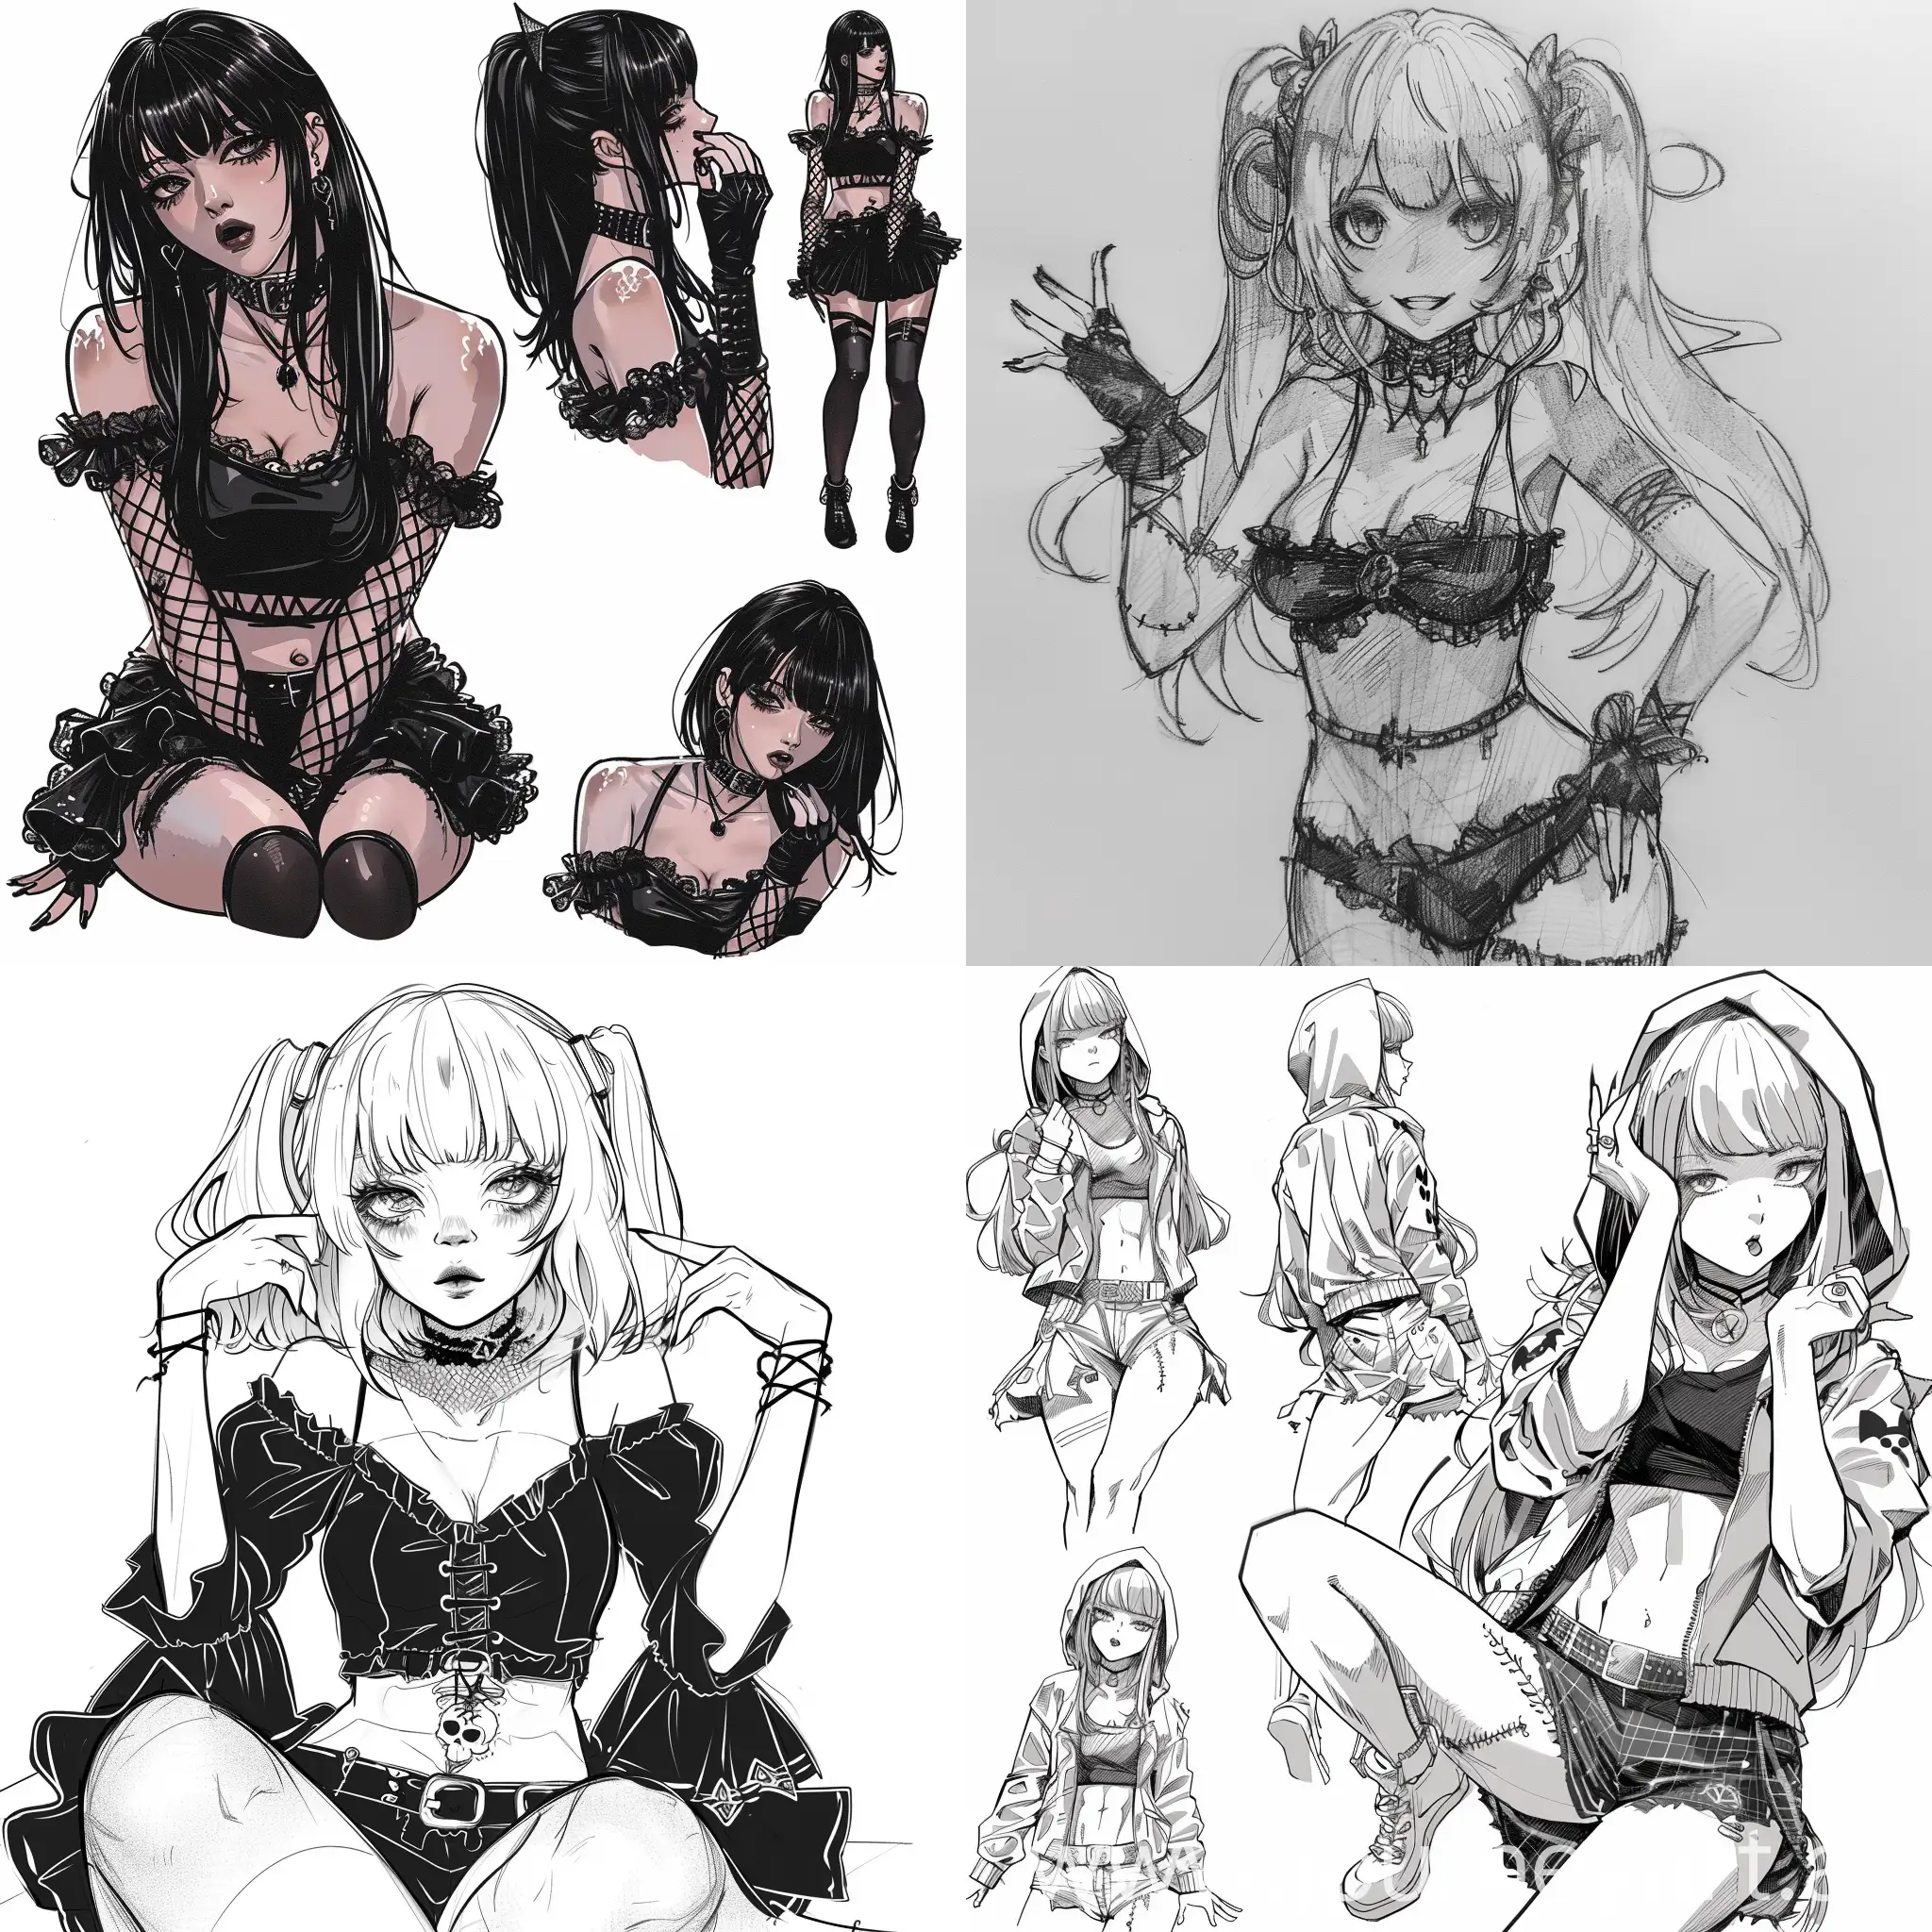 draw a goth anime girl doing poses